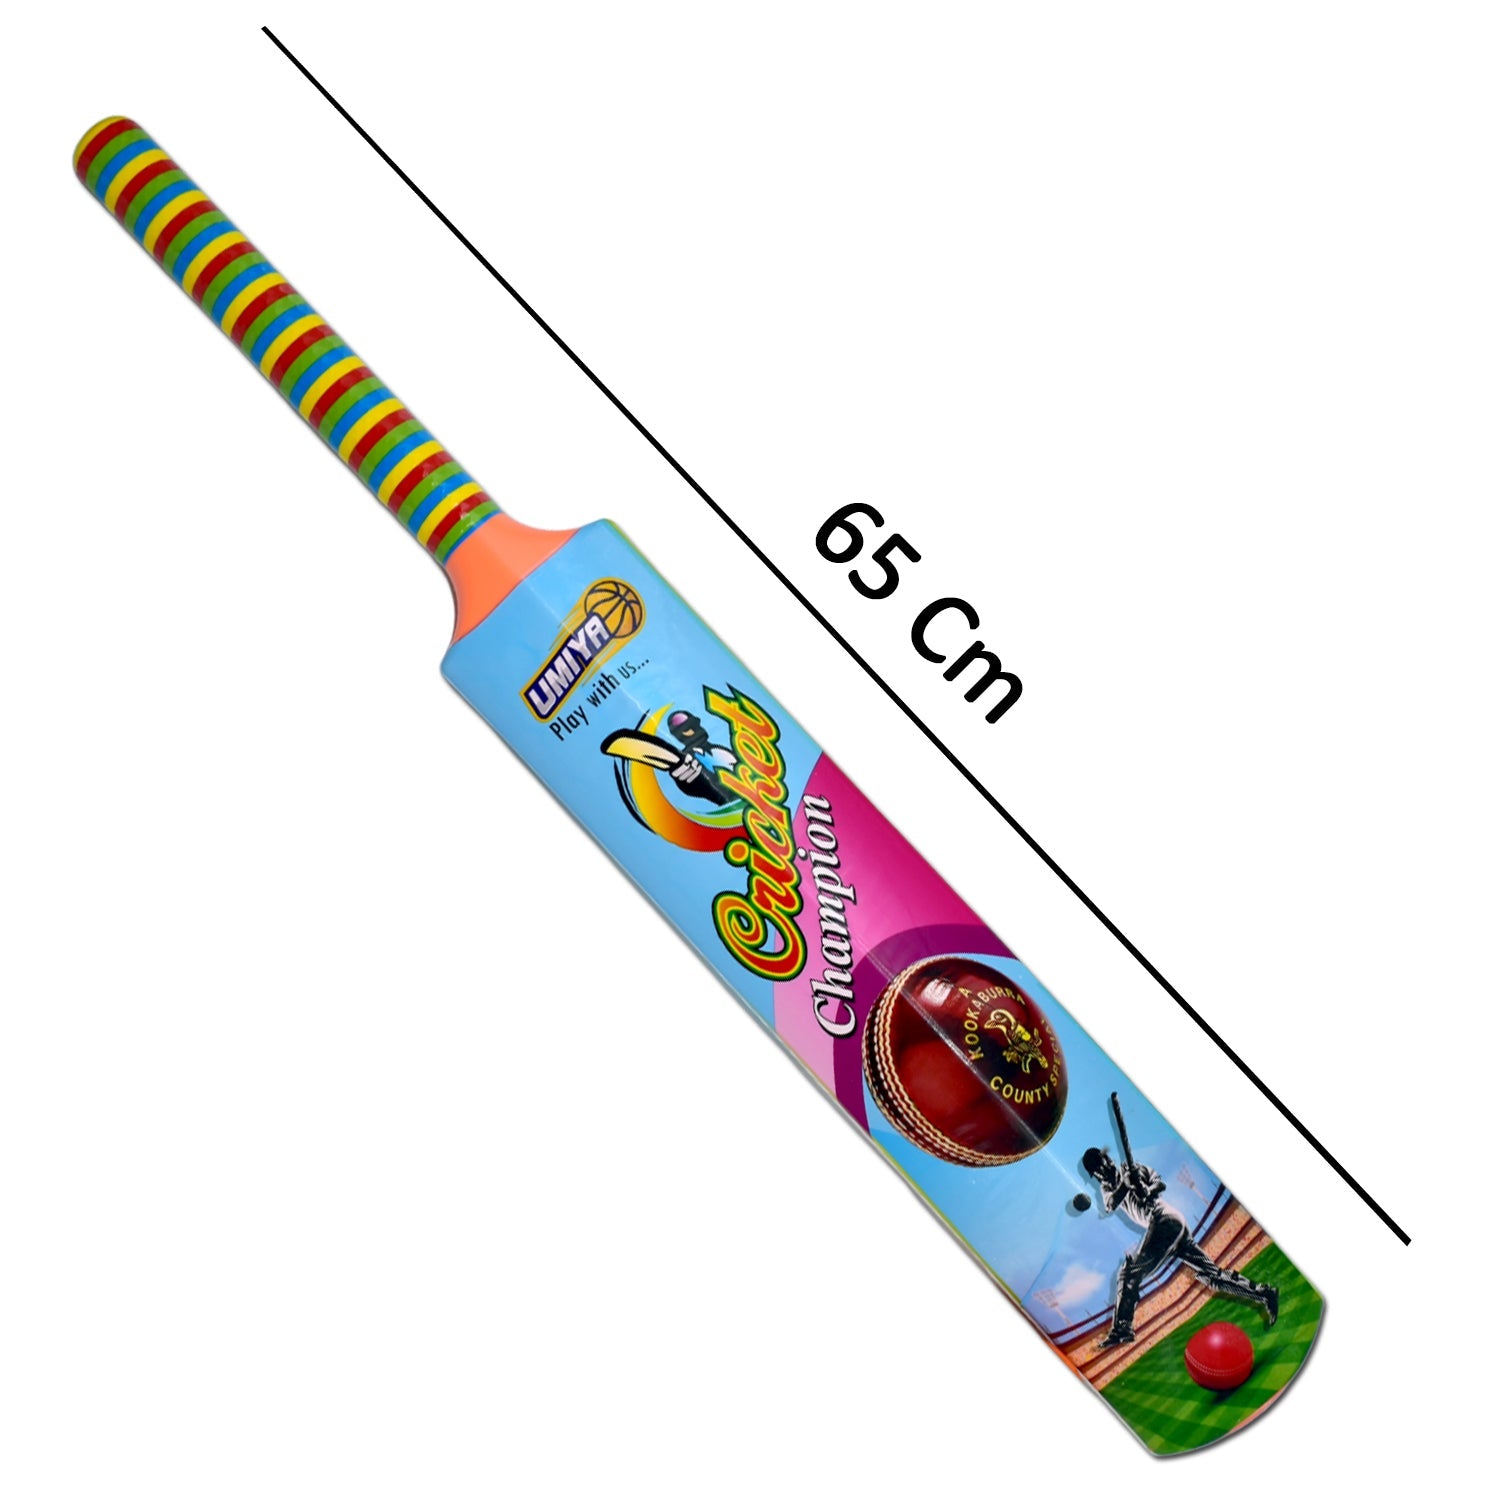 8001 Plastic Cricket Bat and Ball Toy for Kids, Bat Ball Set for Boys and Girls 